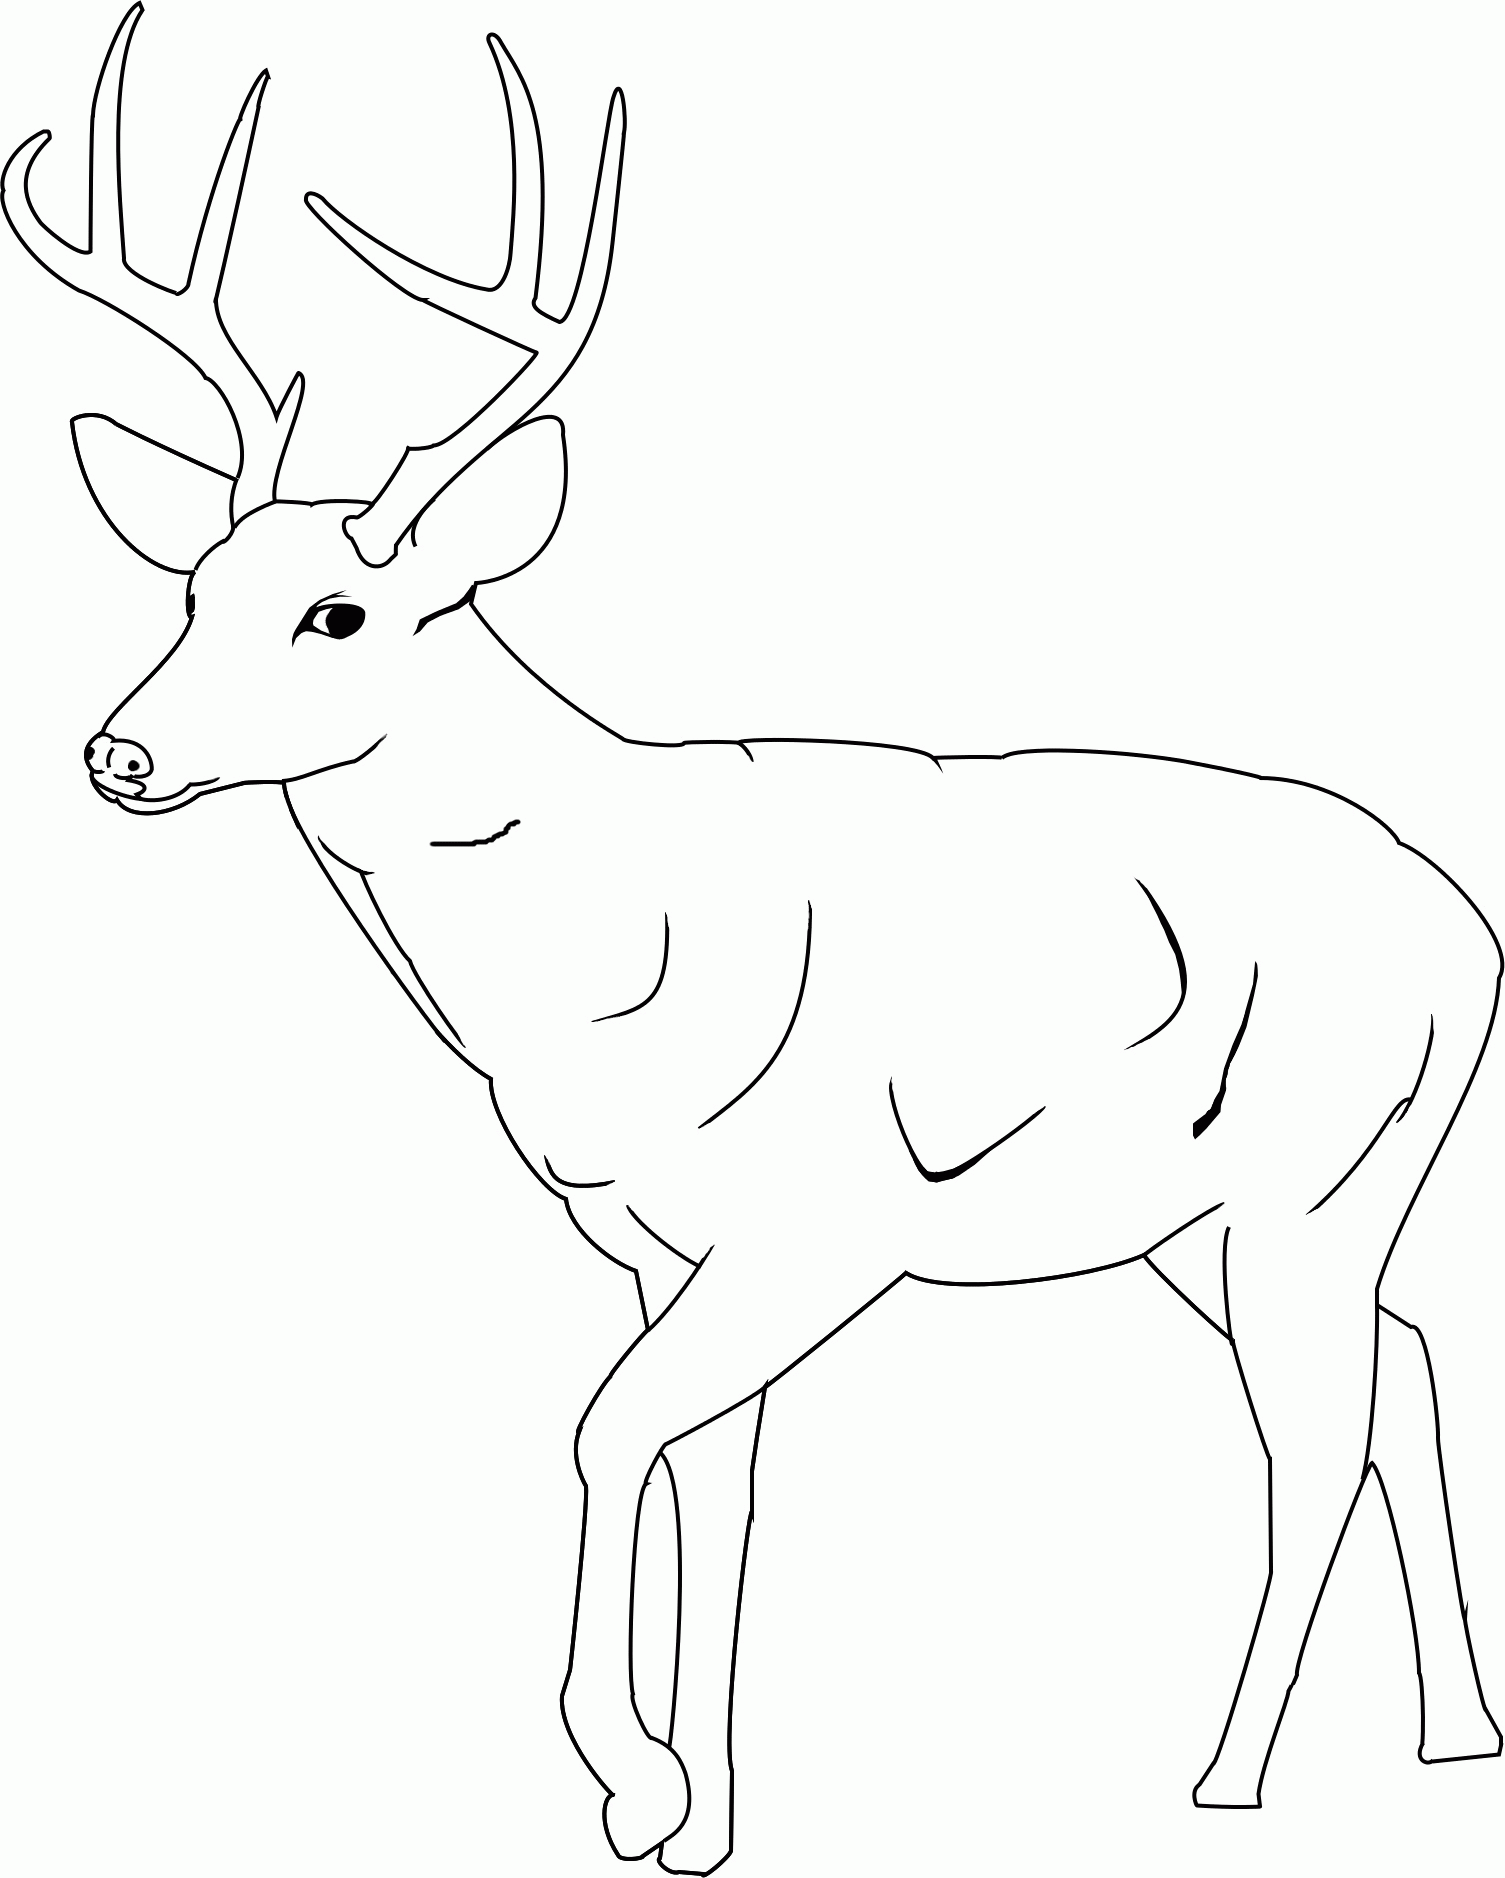 Deer Coloring Pages Printable for Pinterest